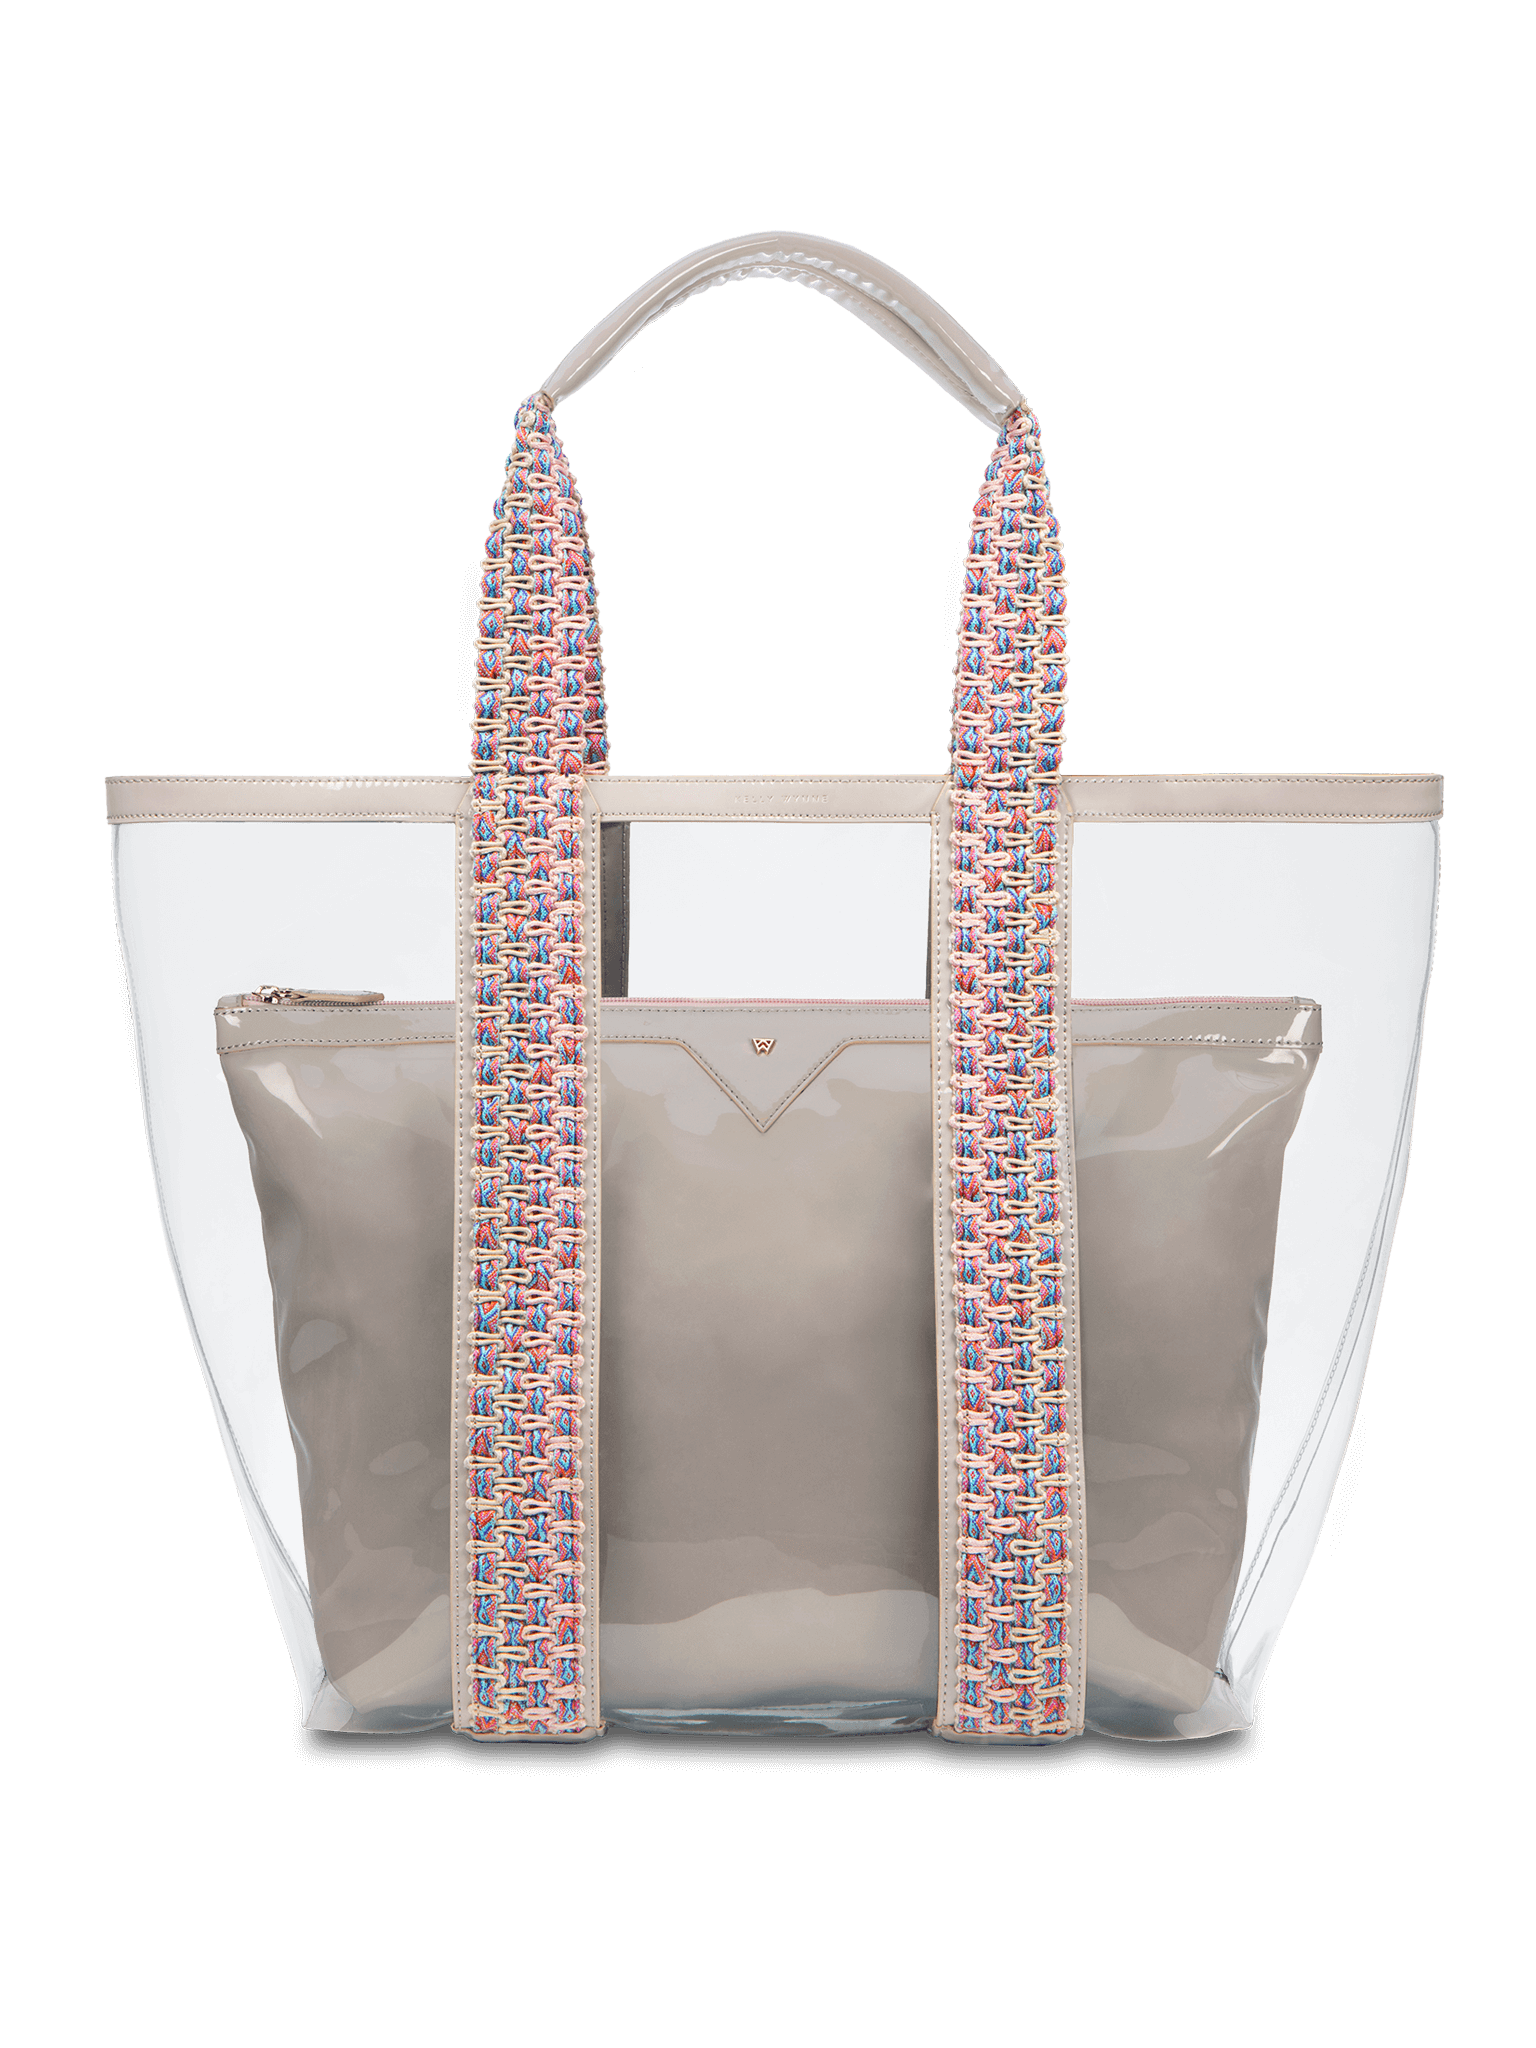 Water resistant, high-quality beach bag. Exterior tote in clear, interior patent leather pouch in Taupe  